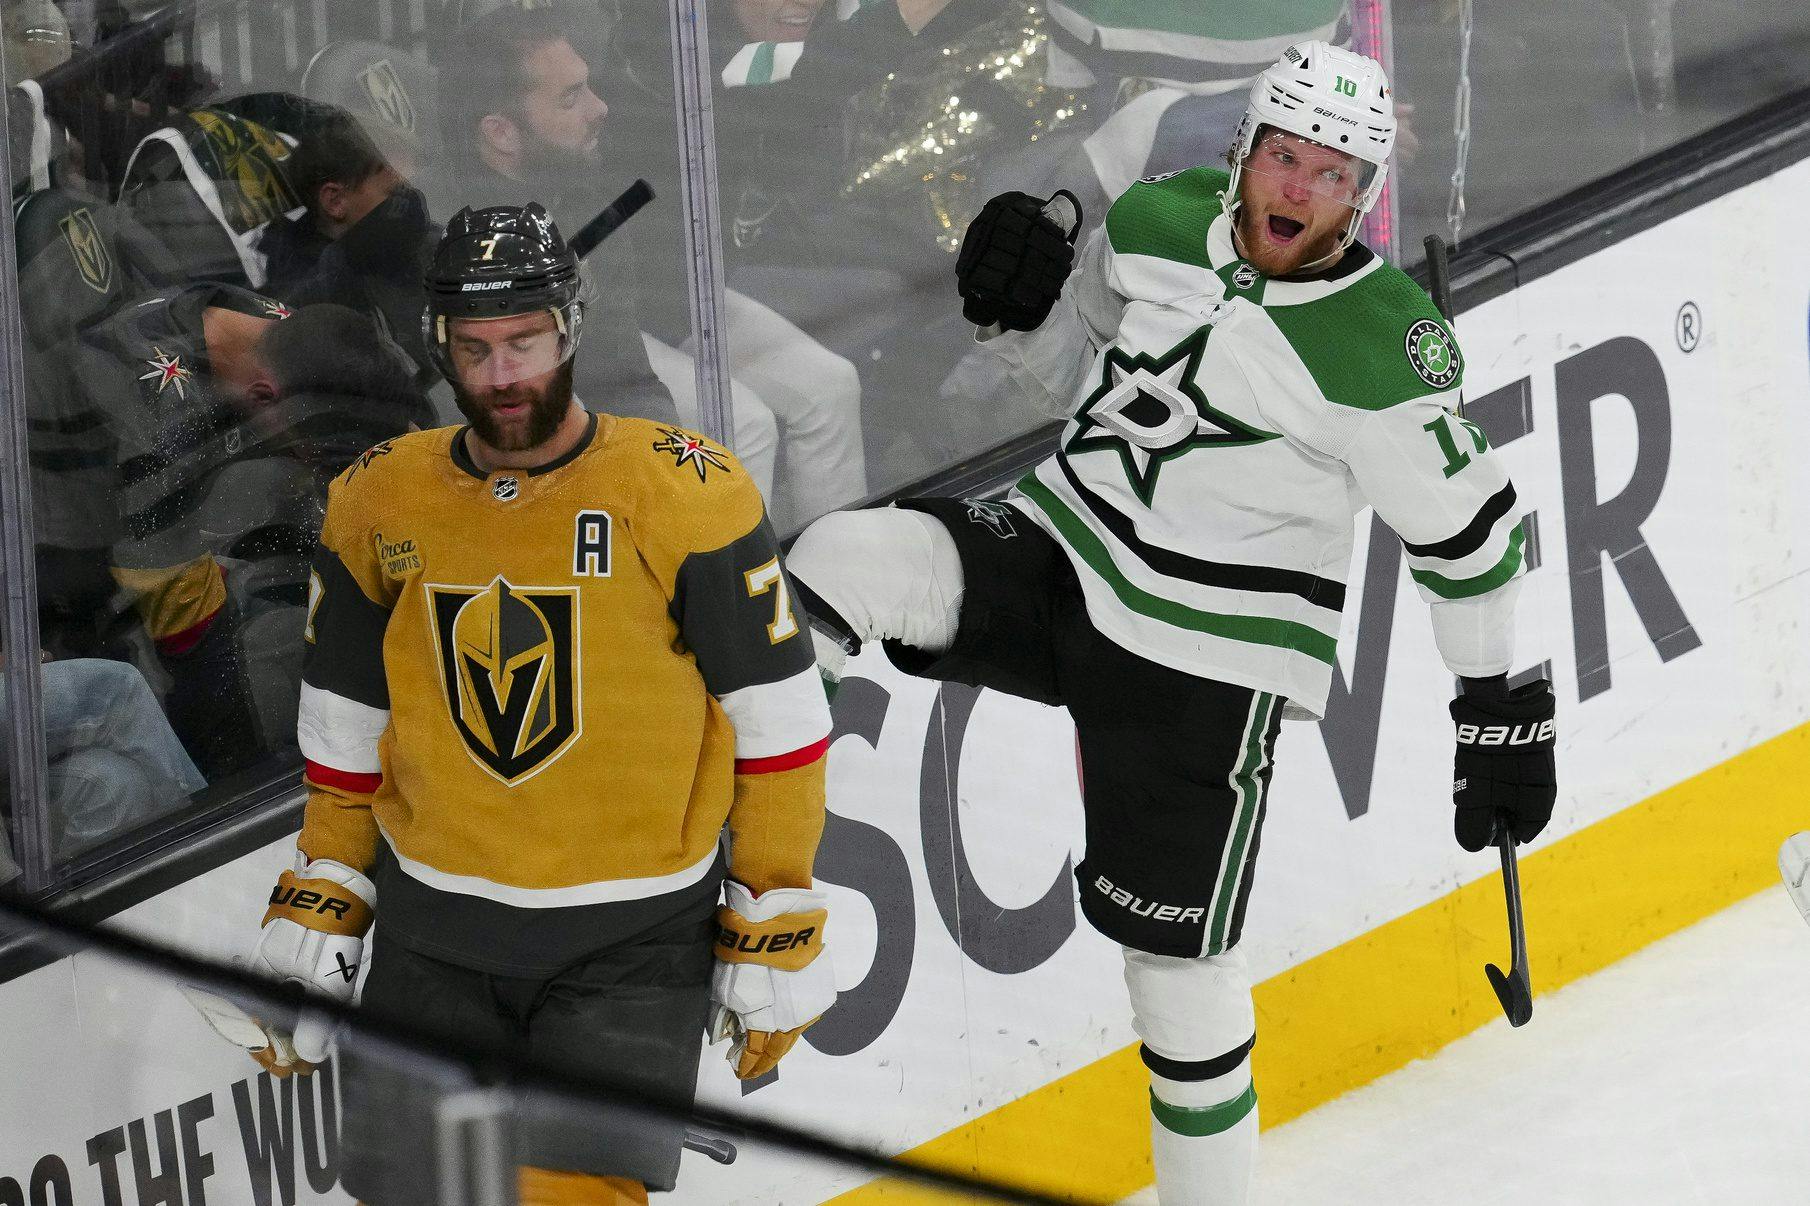 Stanley Cup Playoffs Day 40: Dellandrea scores two goals in third period to lead Stars to 4-2 win